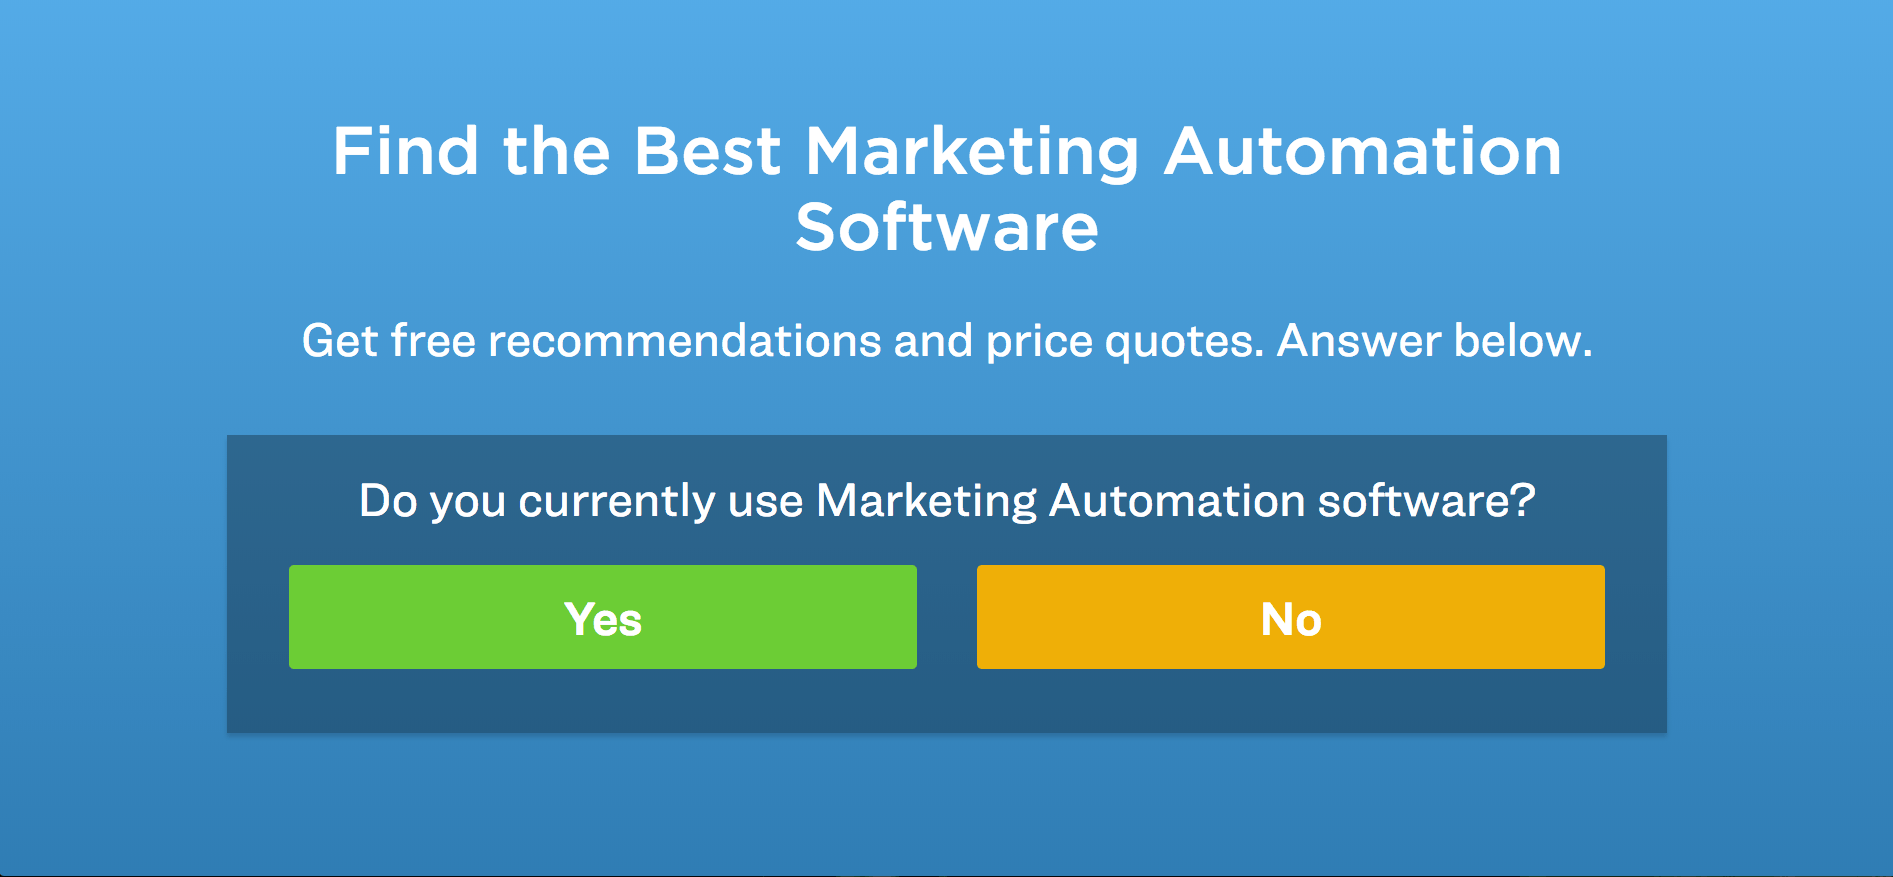 The best Marketing Automation Software